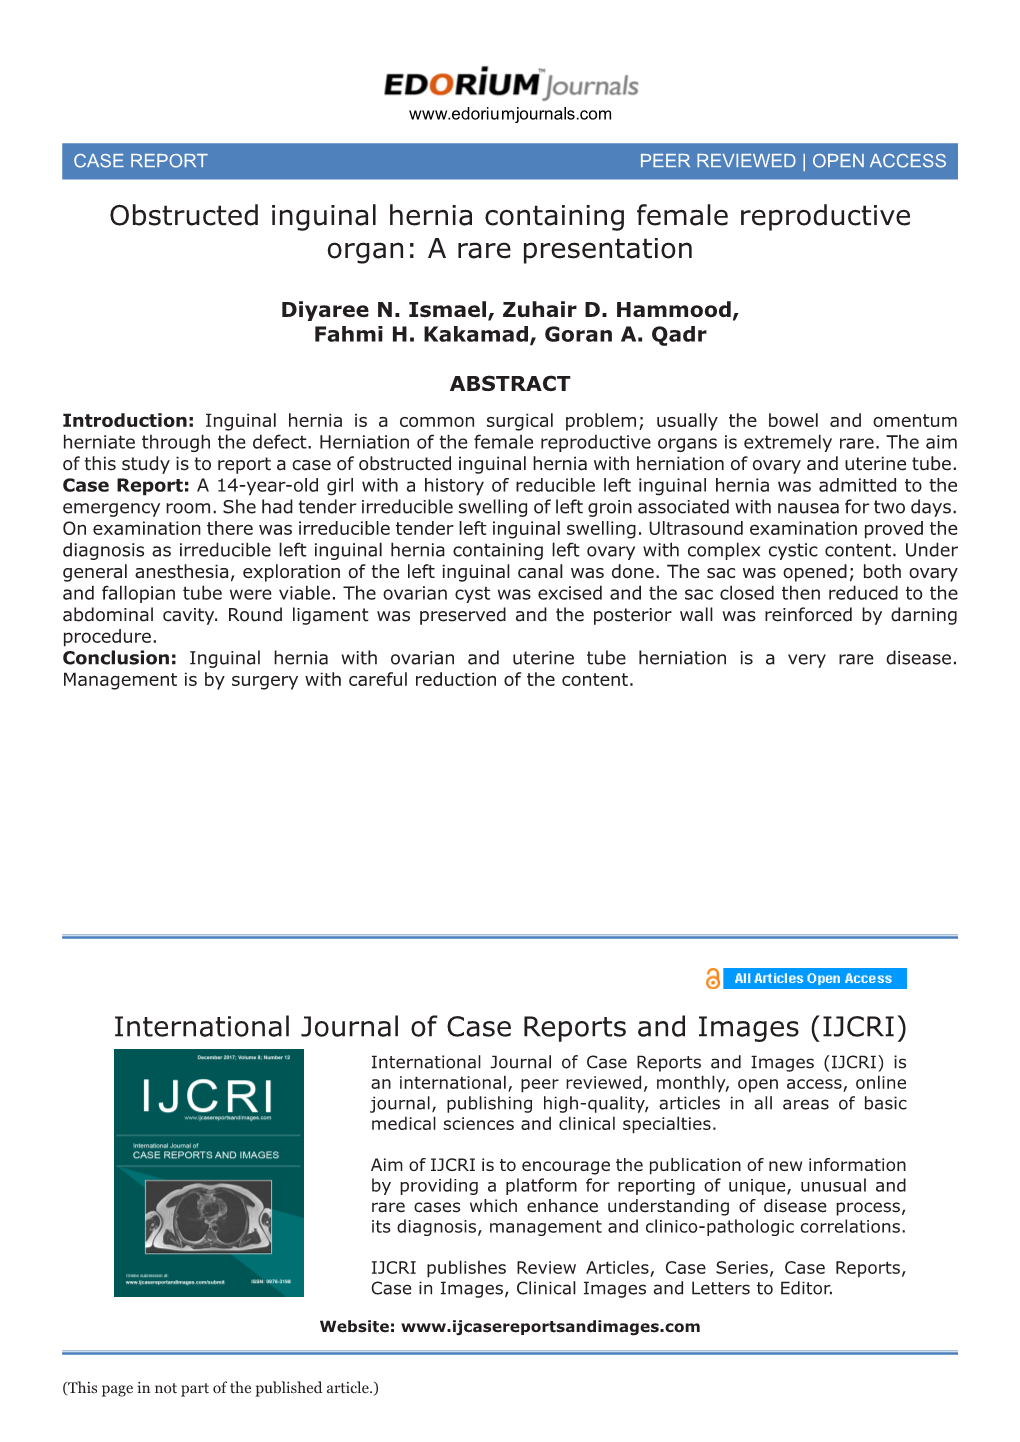 International Journal of Case Reports and Images (IJCRI) Obstructed Inguinal Hernia Containing Female Reproductive Organ: a Rare